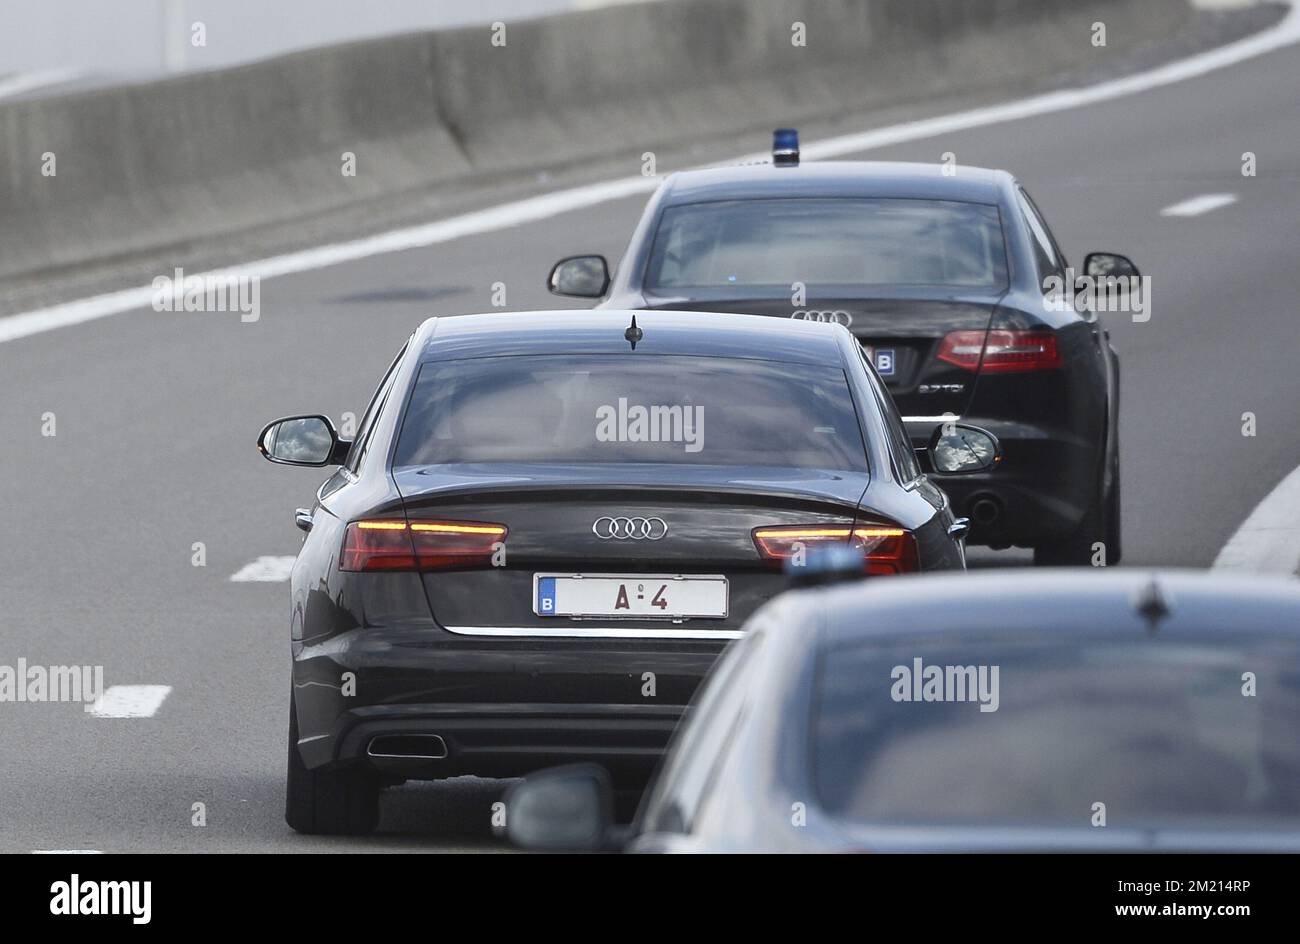 Vice-Prime Minister and Interior Minister Jan Jambon must be in an Audi car, with car plate A4, on his way to visit Brussels Airport, in Zaventem, Tuesday 22 March 2016. Two explosions in the departure hall of Brussels Airport this morning took the lives of 14 people, 81 got injured. Another explosion happened in the Maelbeek - Maalbeek subway station, Brussels' public transport company STIB-MIVB has confirmed 20 deaths and 106 injured people. Government sources speak of a terrorist attack. The terrorist threat level has been heightened to four across the country. BELGA PHOTO DIRK WAEM Stock Photo